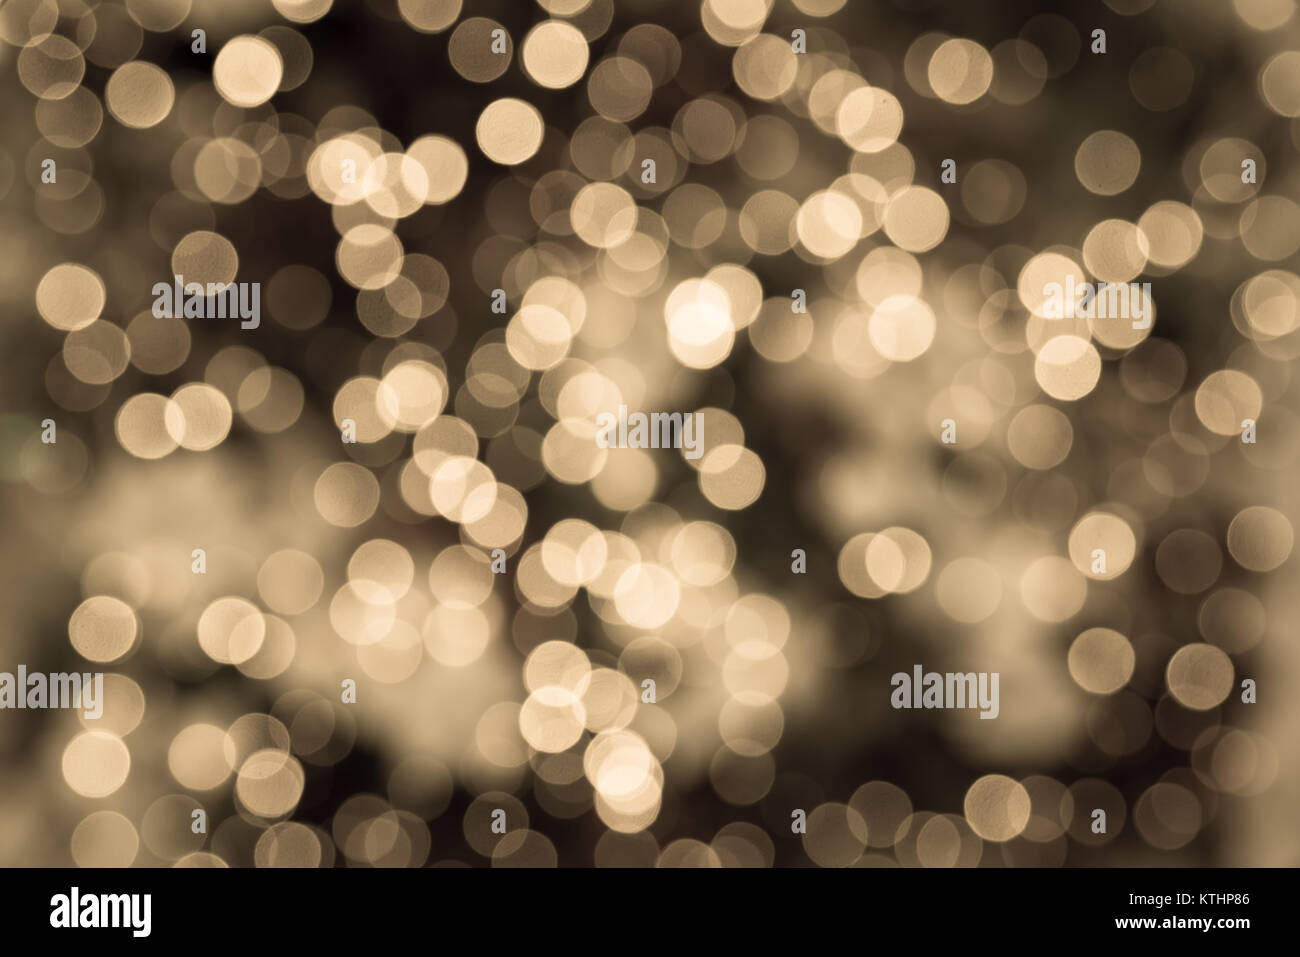 White Bokeh Lights Abstract Background Stock Photo